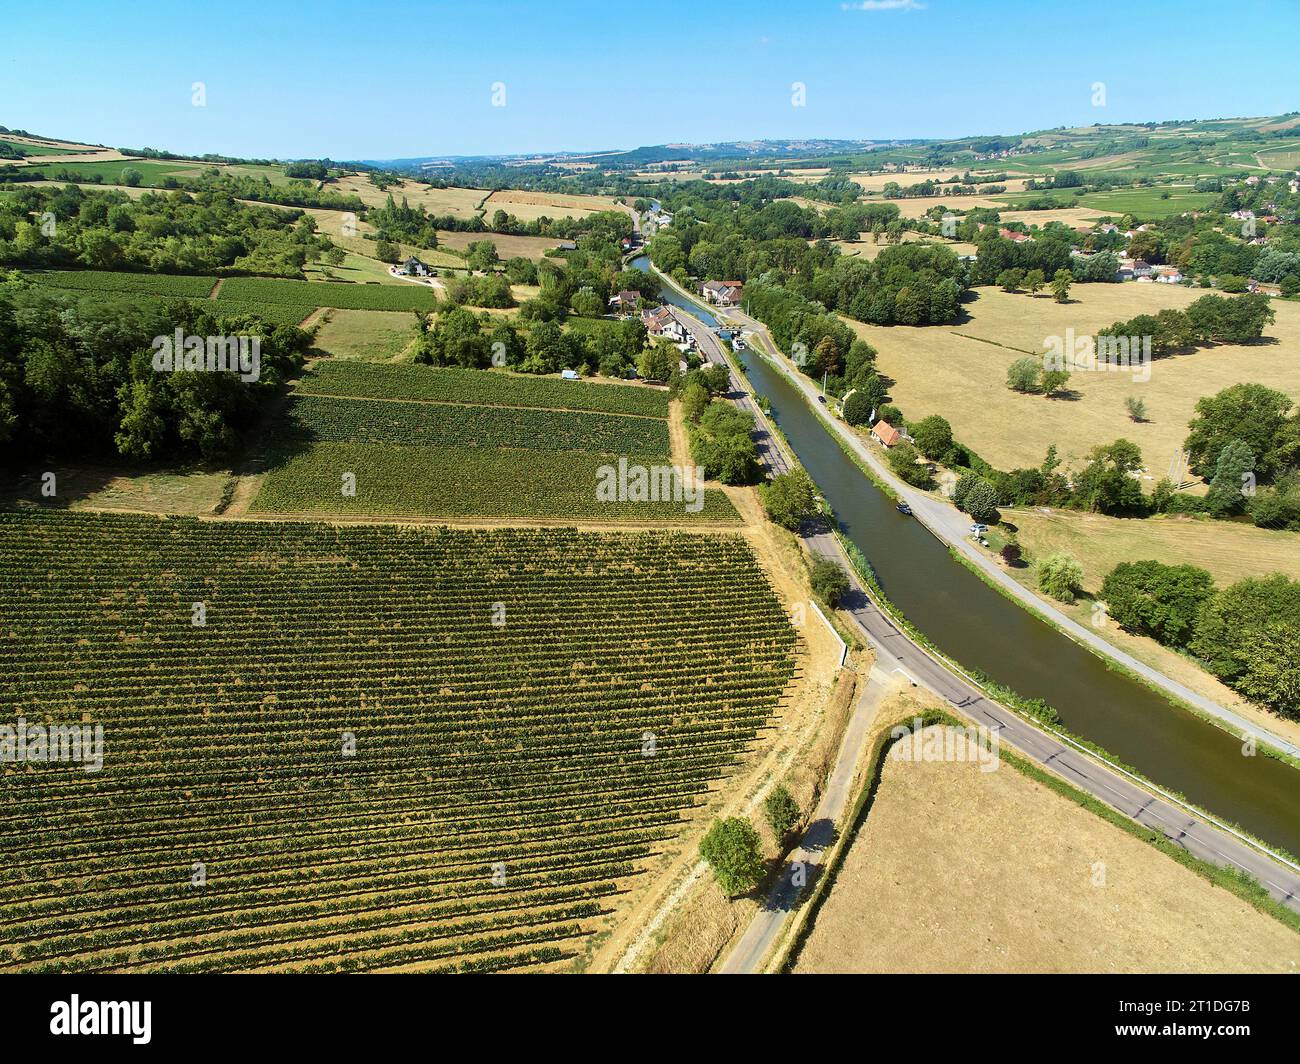 The Canal du Centre in the area of Saint Gilles and Dennevy surrounded by the vineyards of Santenay and Maranges, Cote de Beaune area Stock Photo